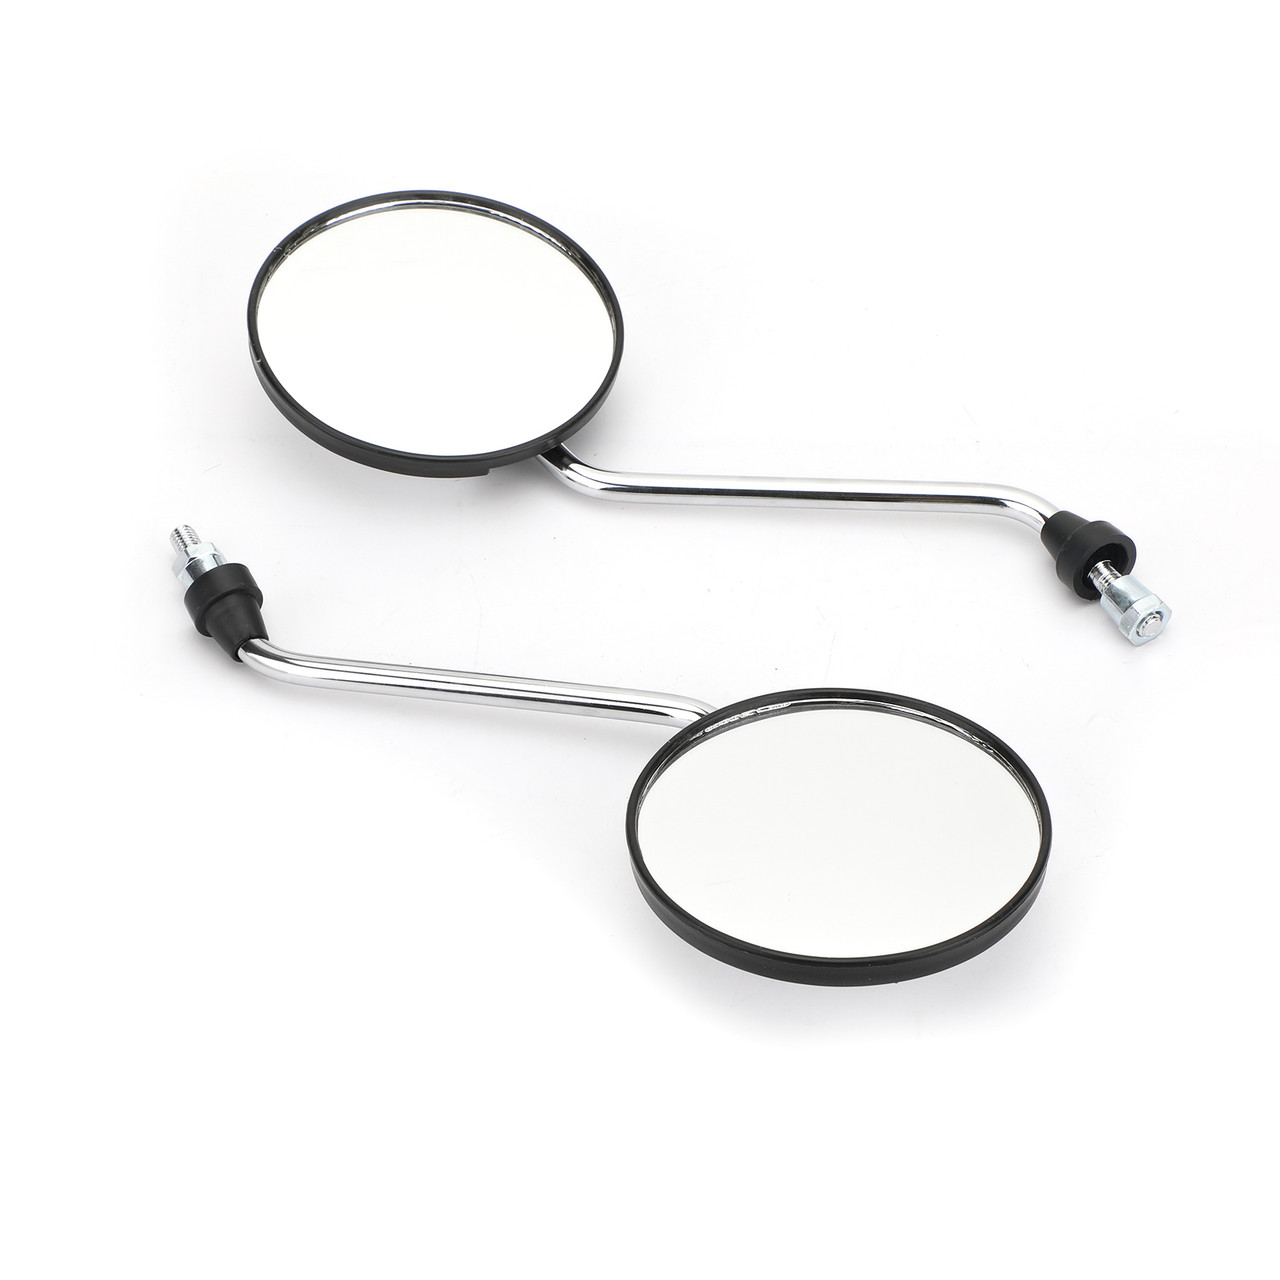 Pair 8mm Rearview Mirrors fits For Kawasaki Scooter Motorcycle Moped Bike ATV with 8MM threads White~BC3